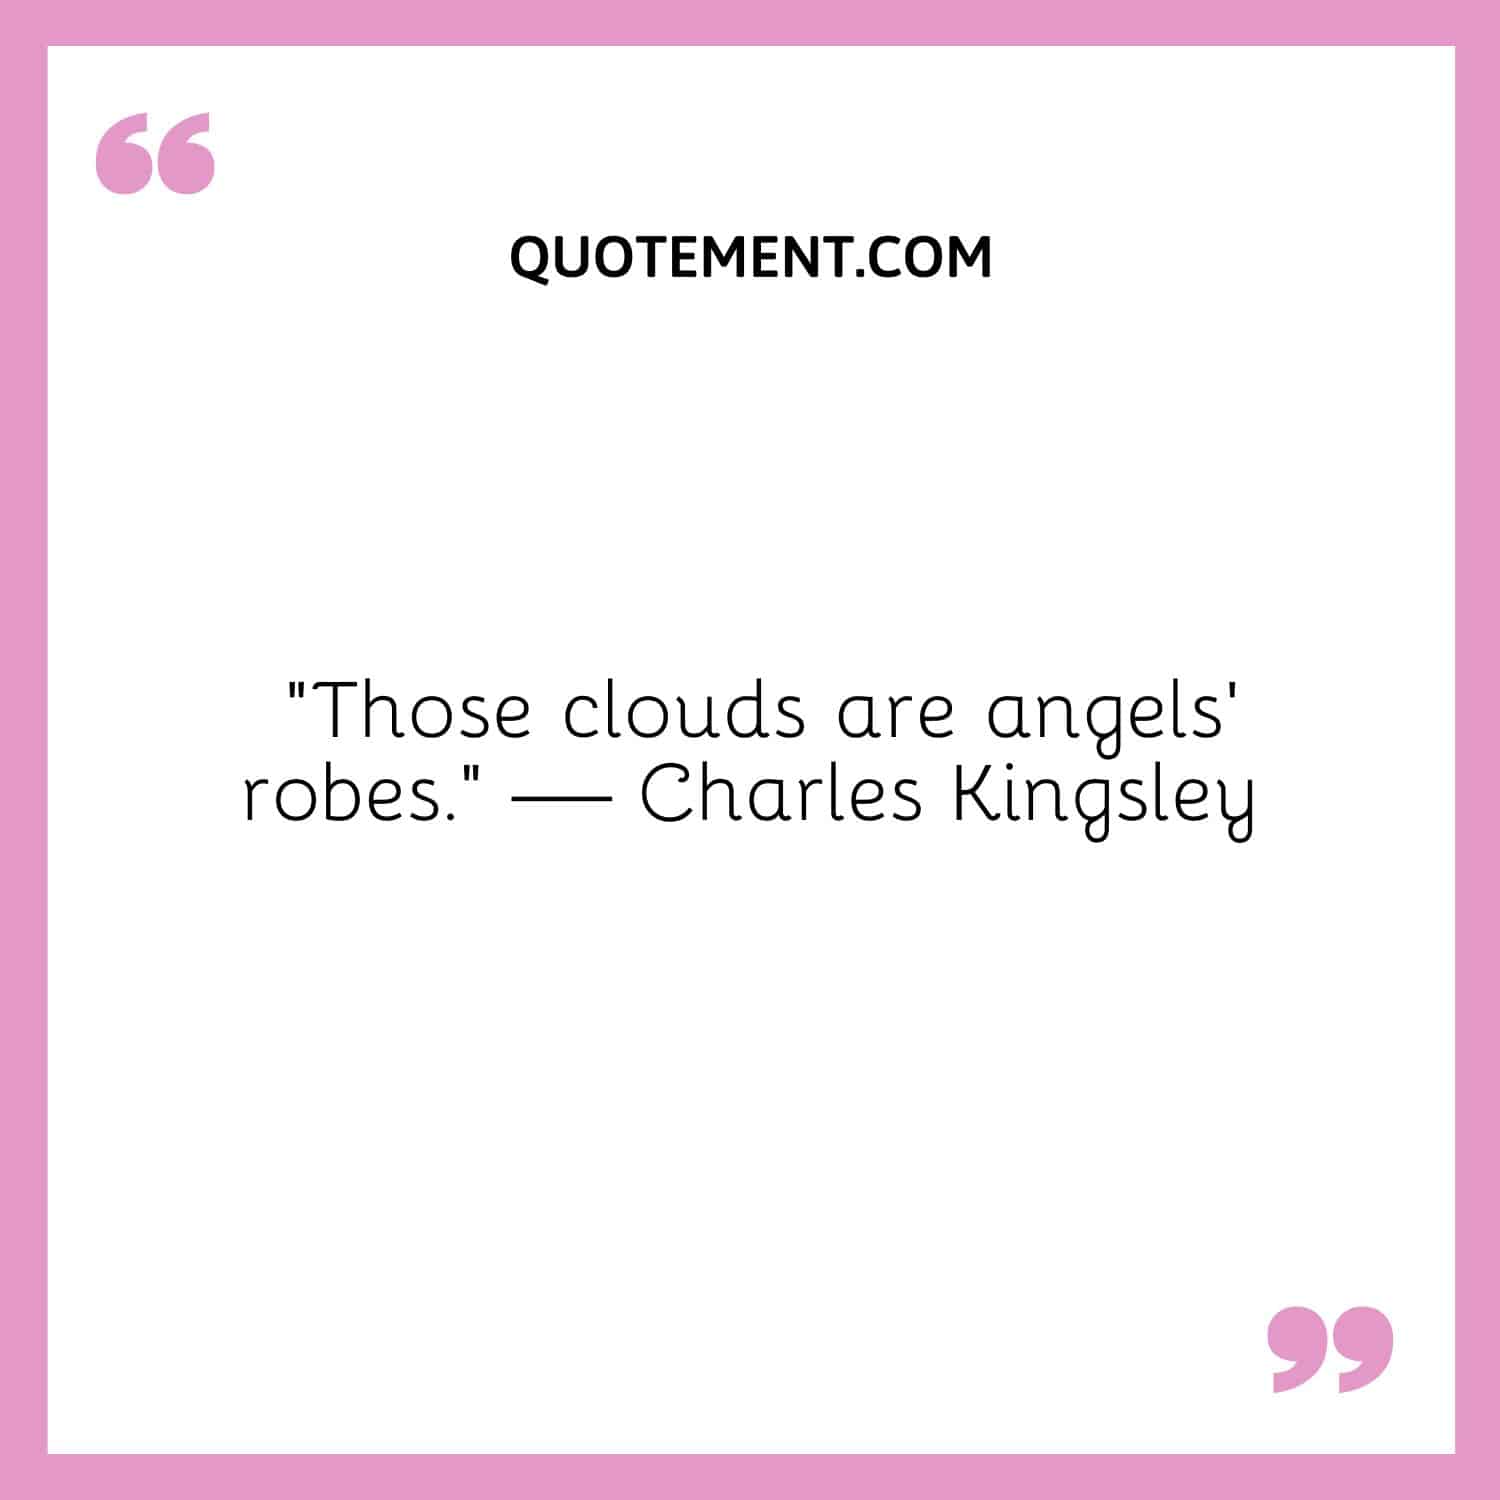 “Those clouds are angels’ robes.” — Charles Kingsley